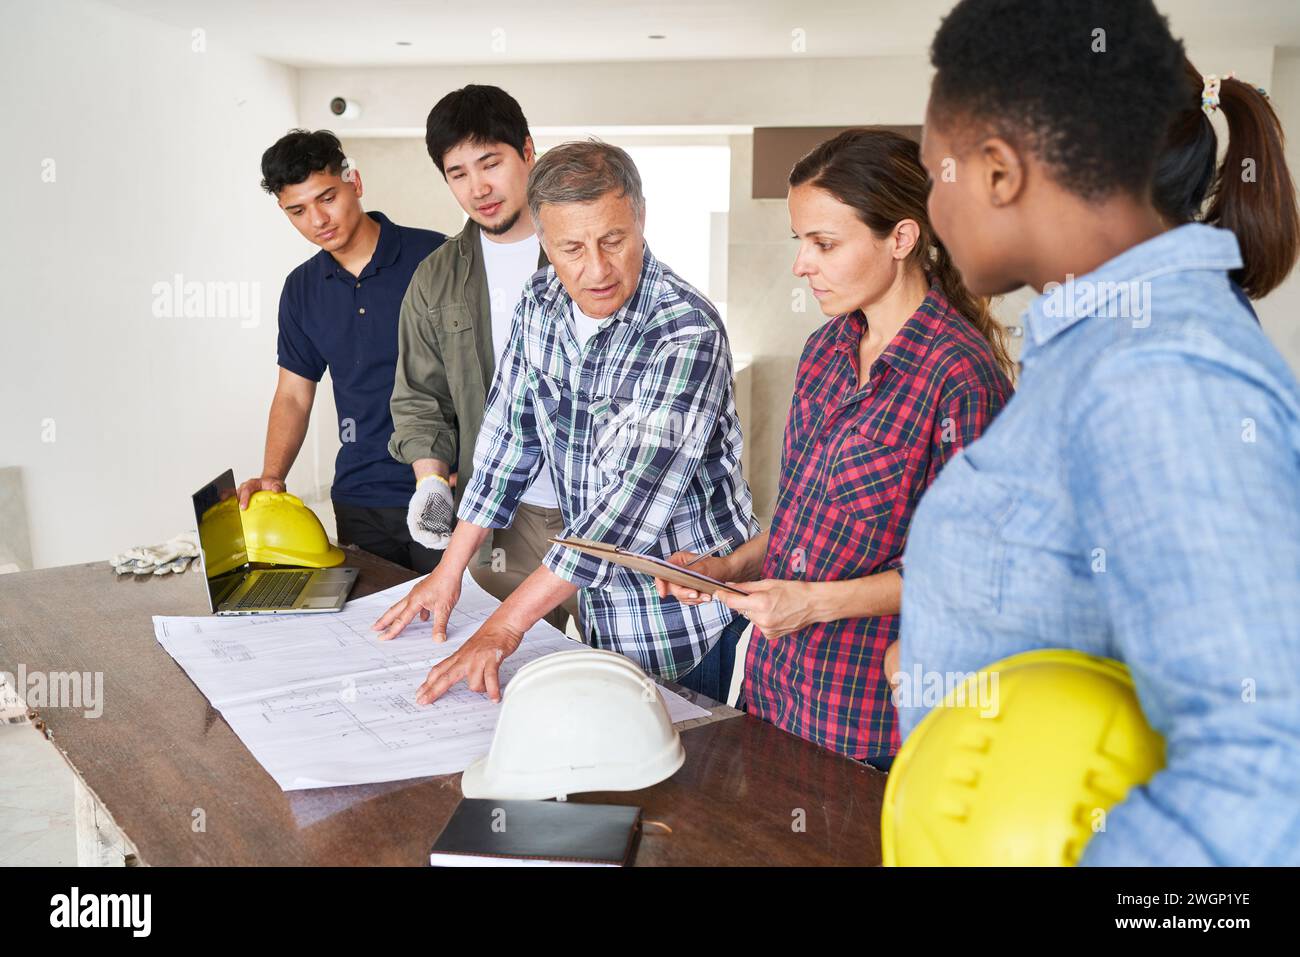 Senior architect discussing blueprint with coworkers Stock Photo